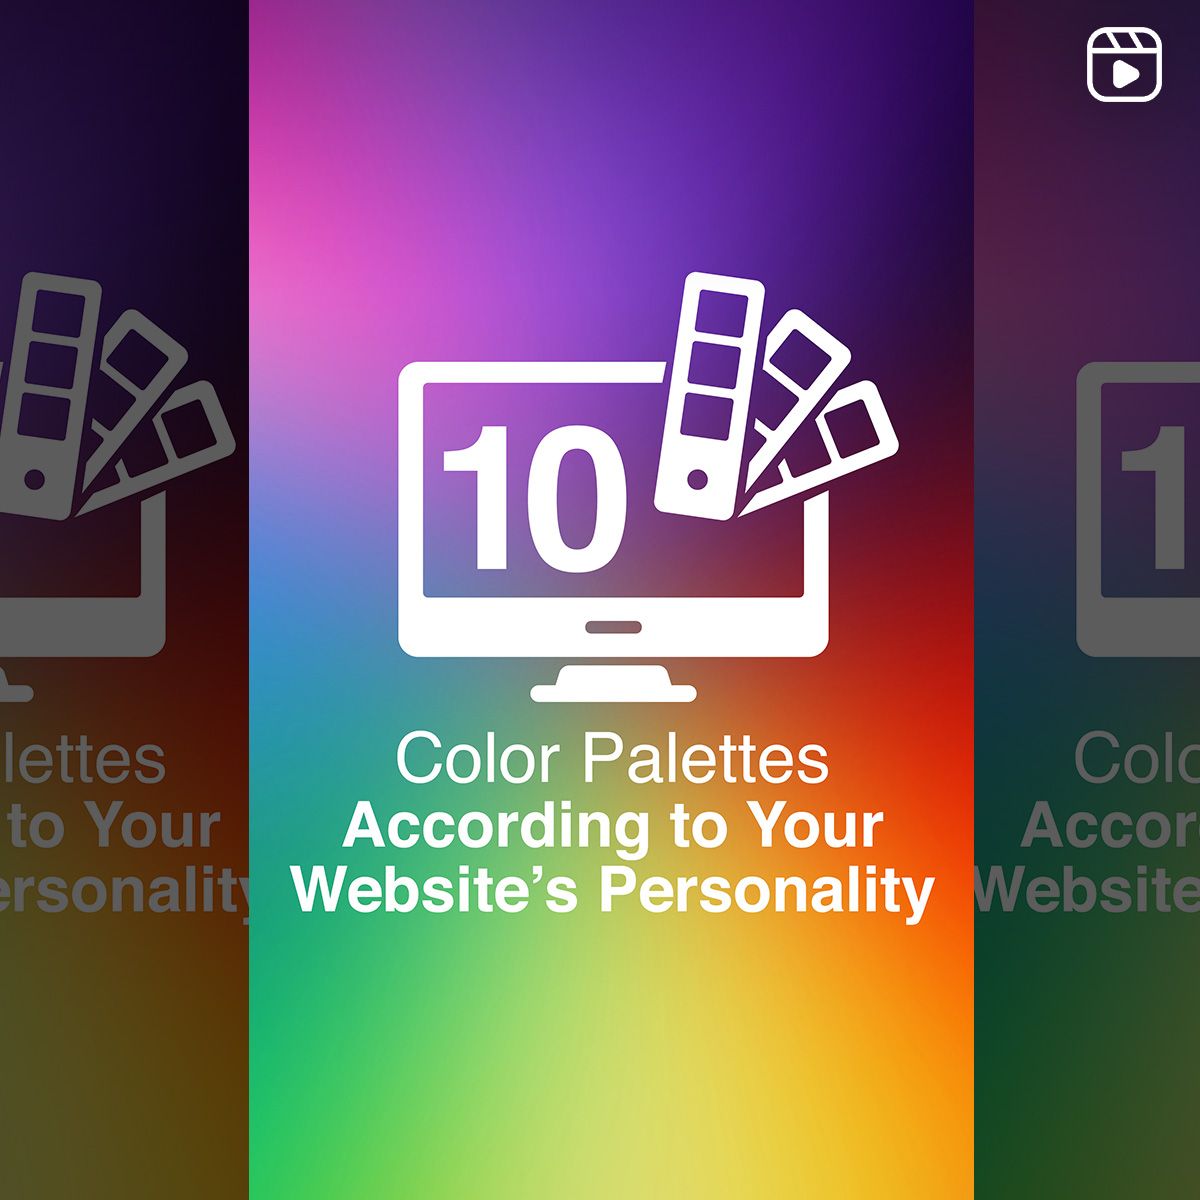 10 Color Palettes According to Your Website's Personality